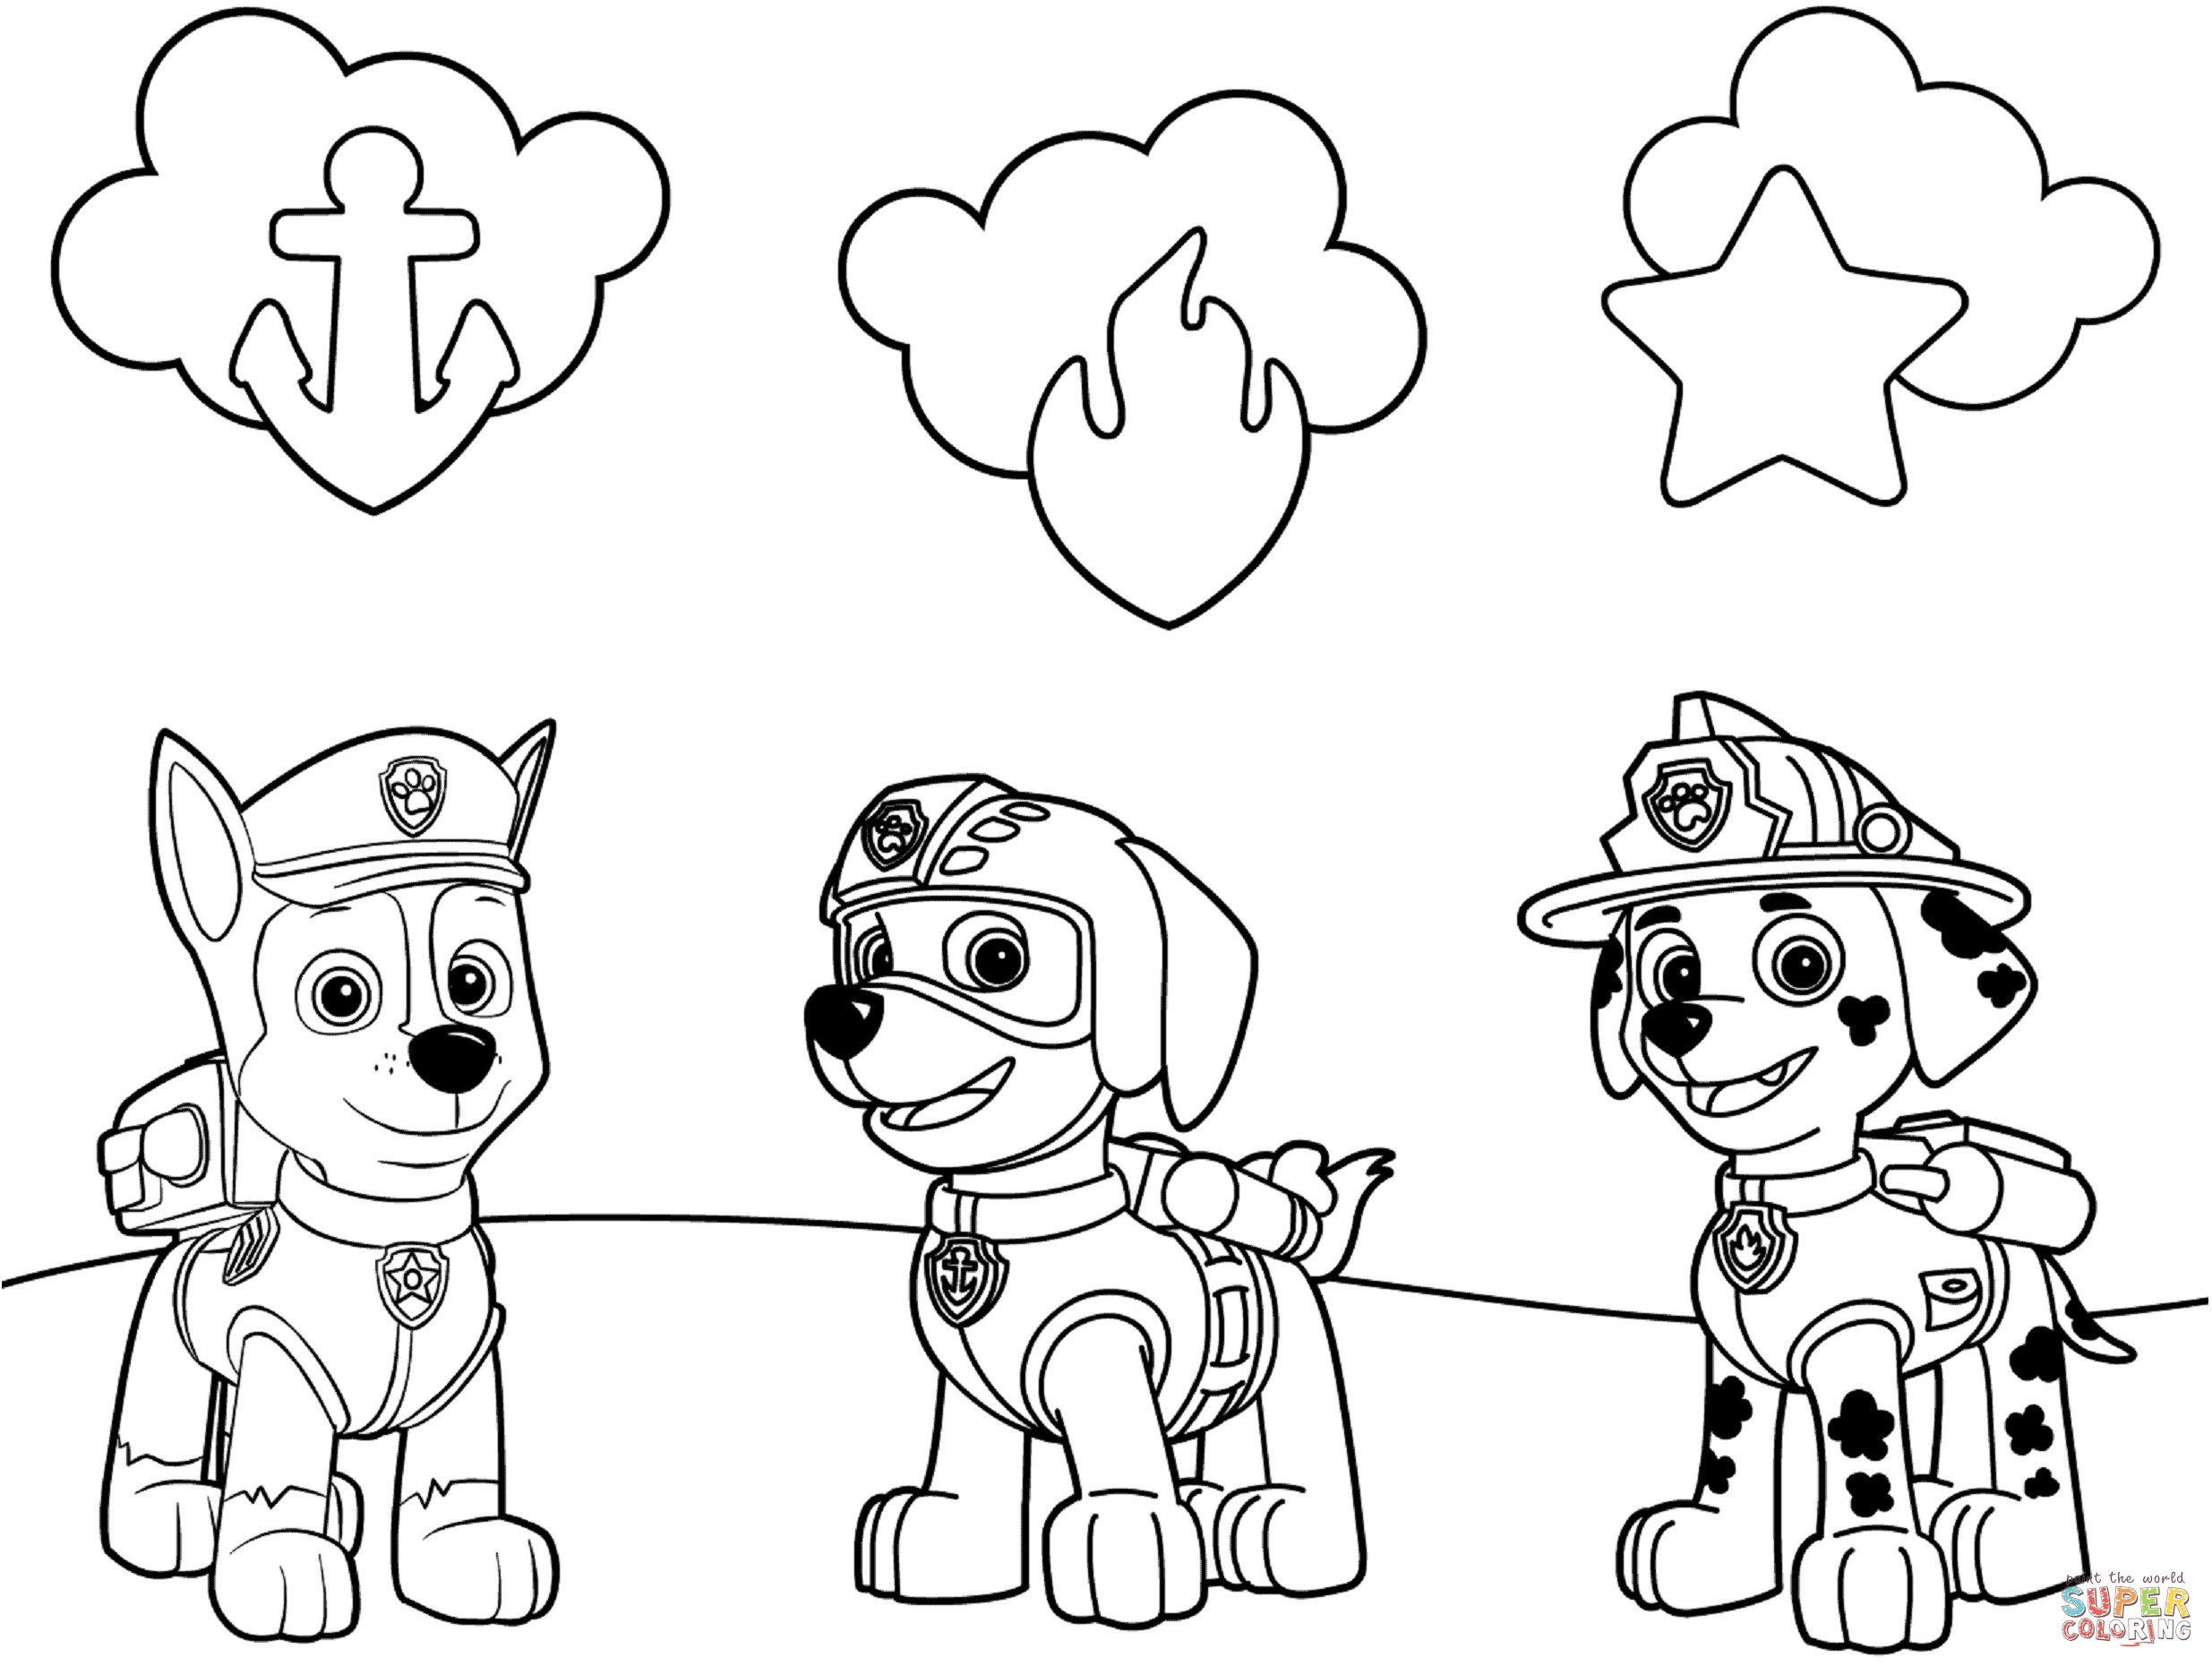 Paw Patrol Printable Coloring Pages
 Paw Patrol Badges coloring page